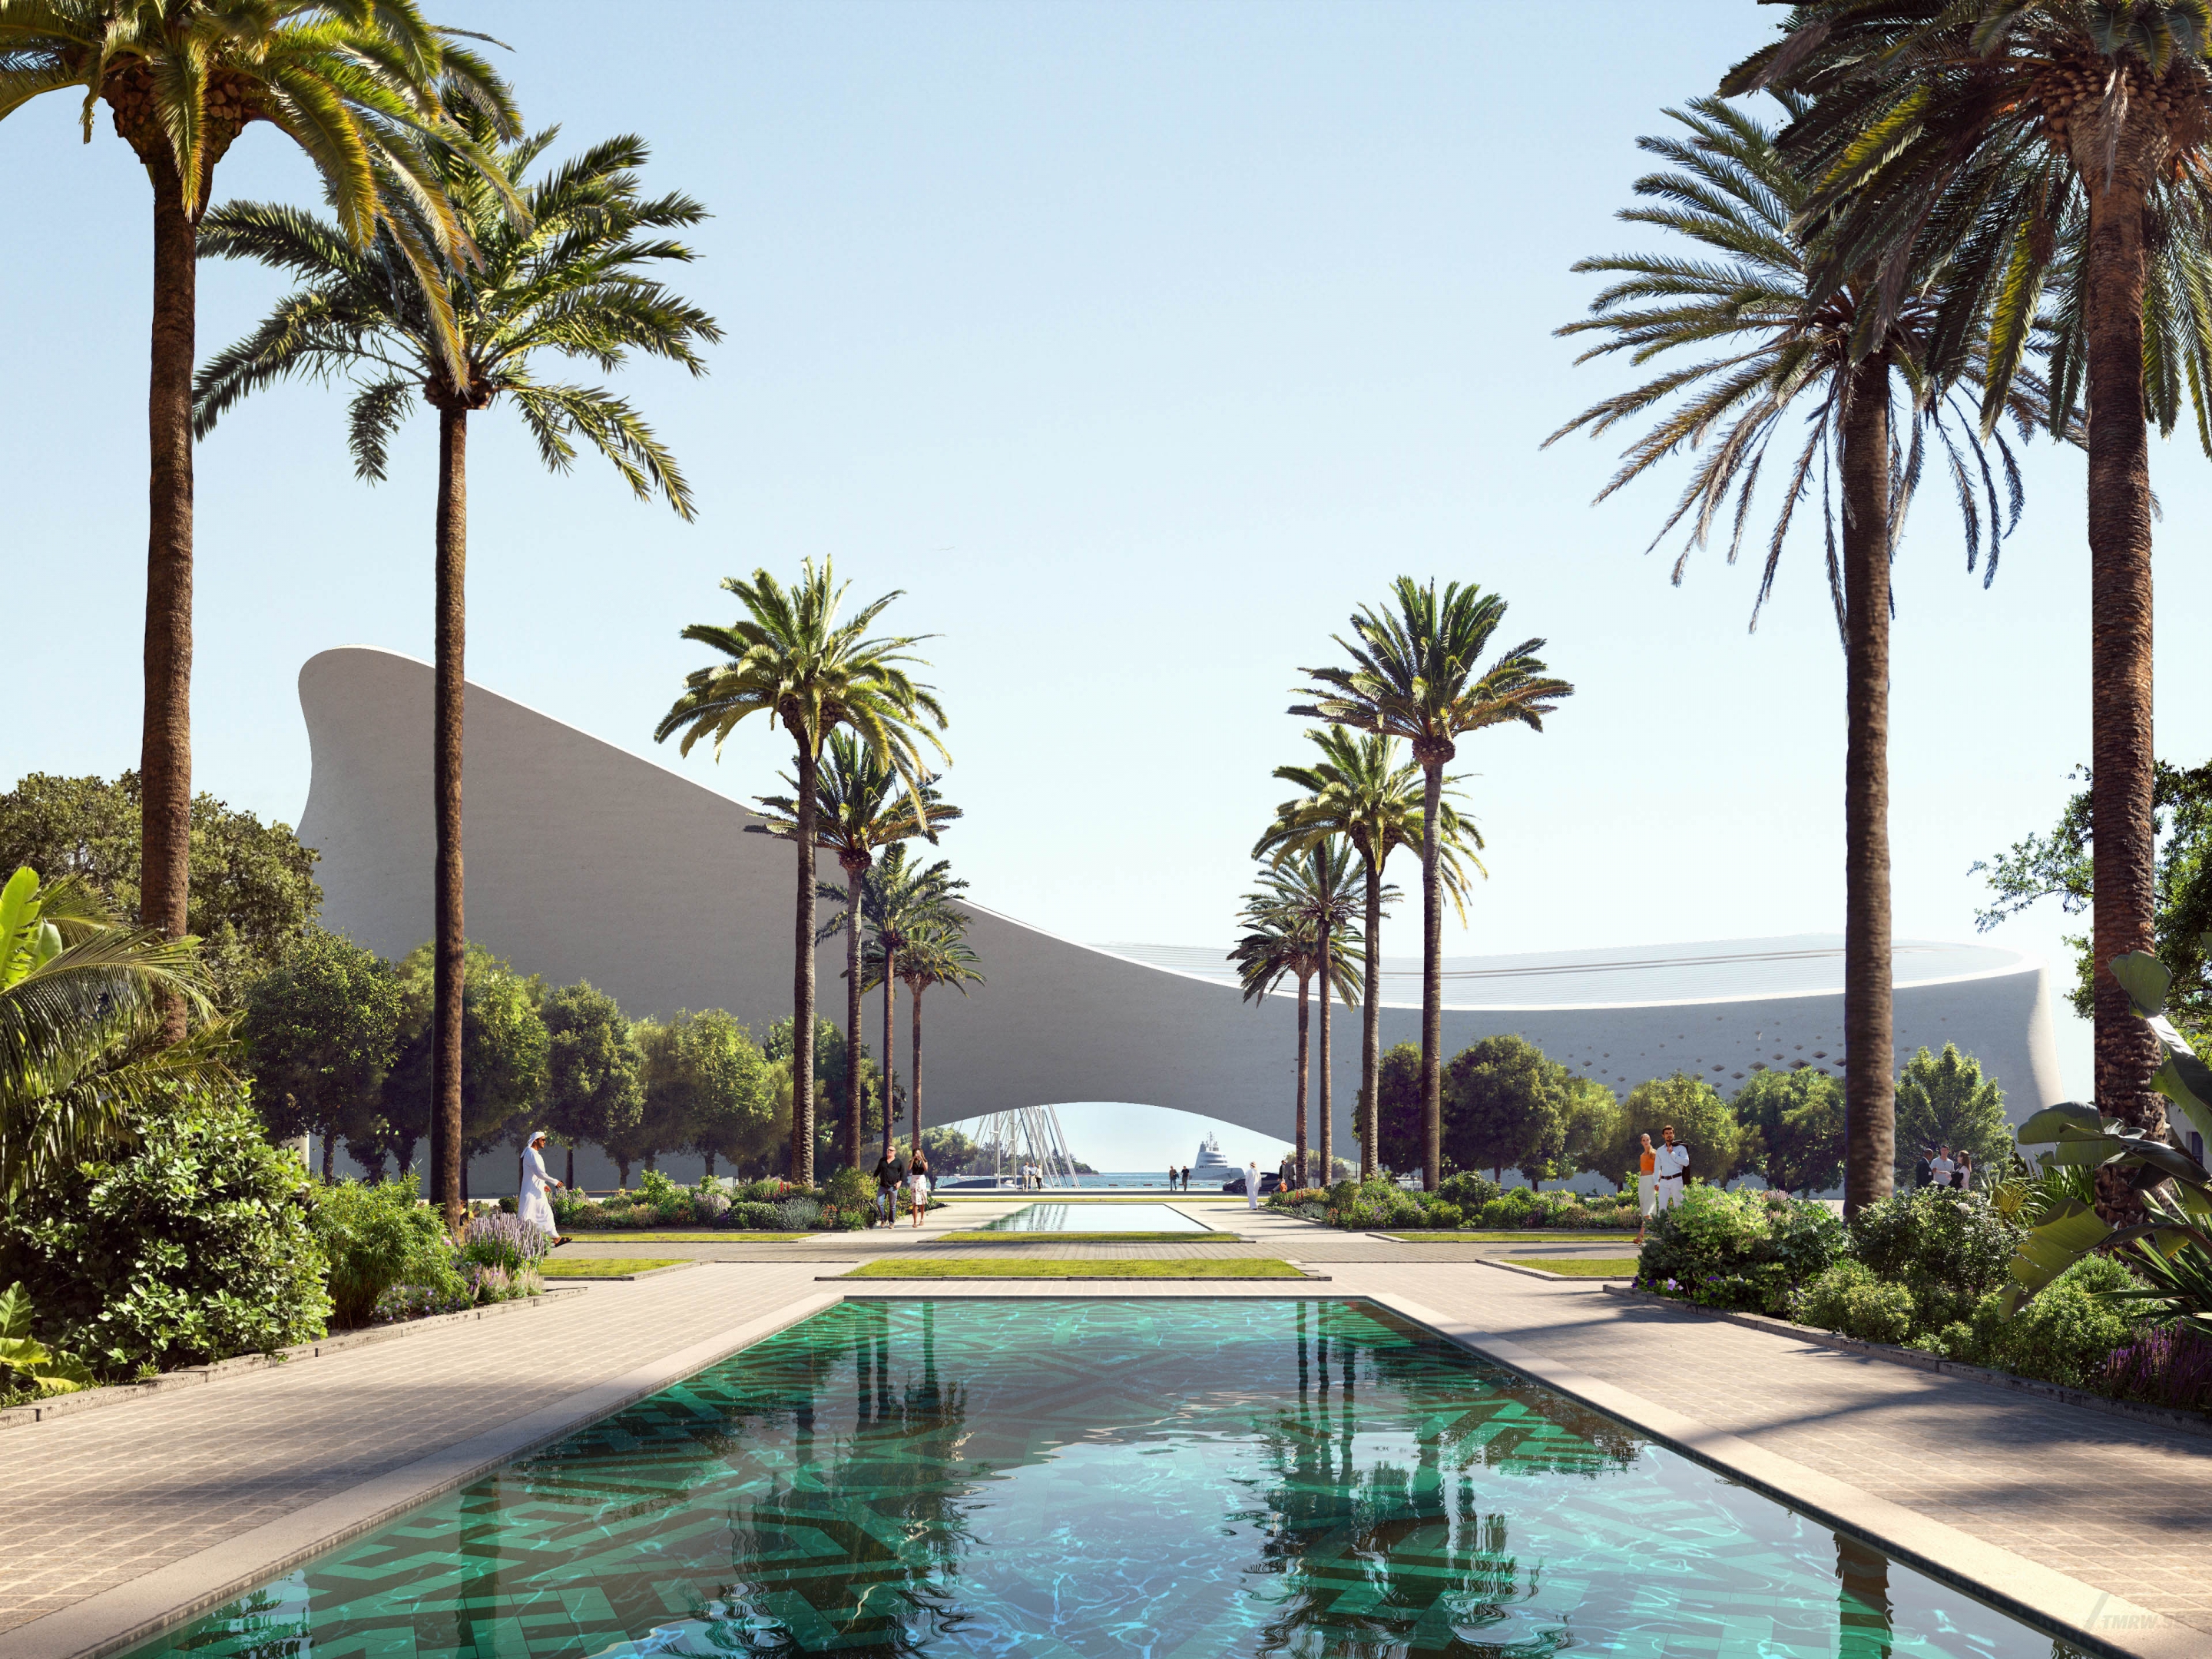 Architectural visualization of Red Sea Yacht Club for HKS/The Red Sea Developement Company. A image of a pool complex in front of a building in daylight from ground view.